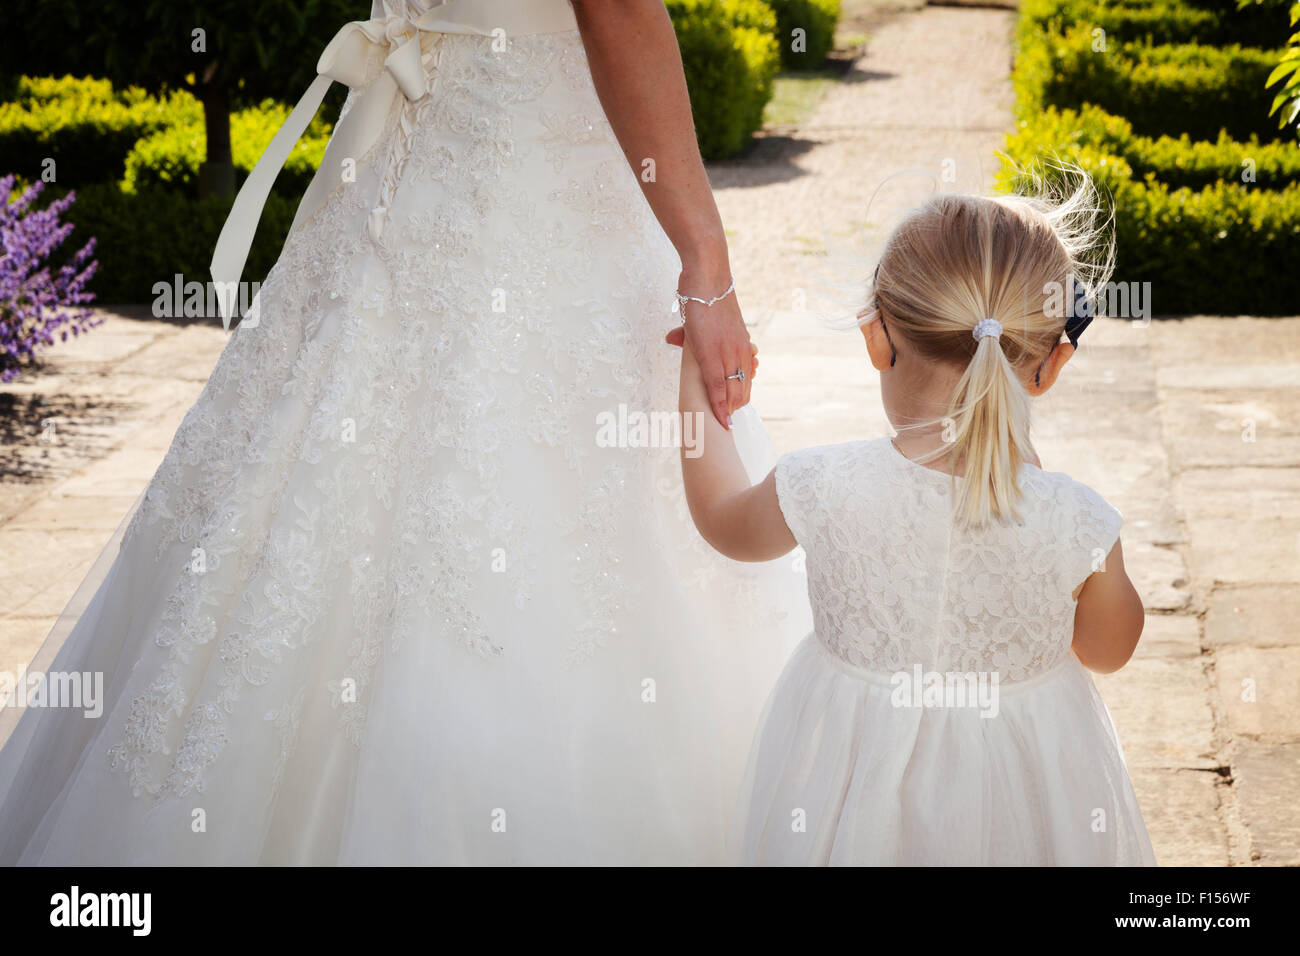 A bride holding the hand of her young bridesmaid at her wedding; UK Stock Photo